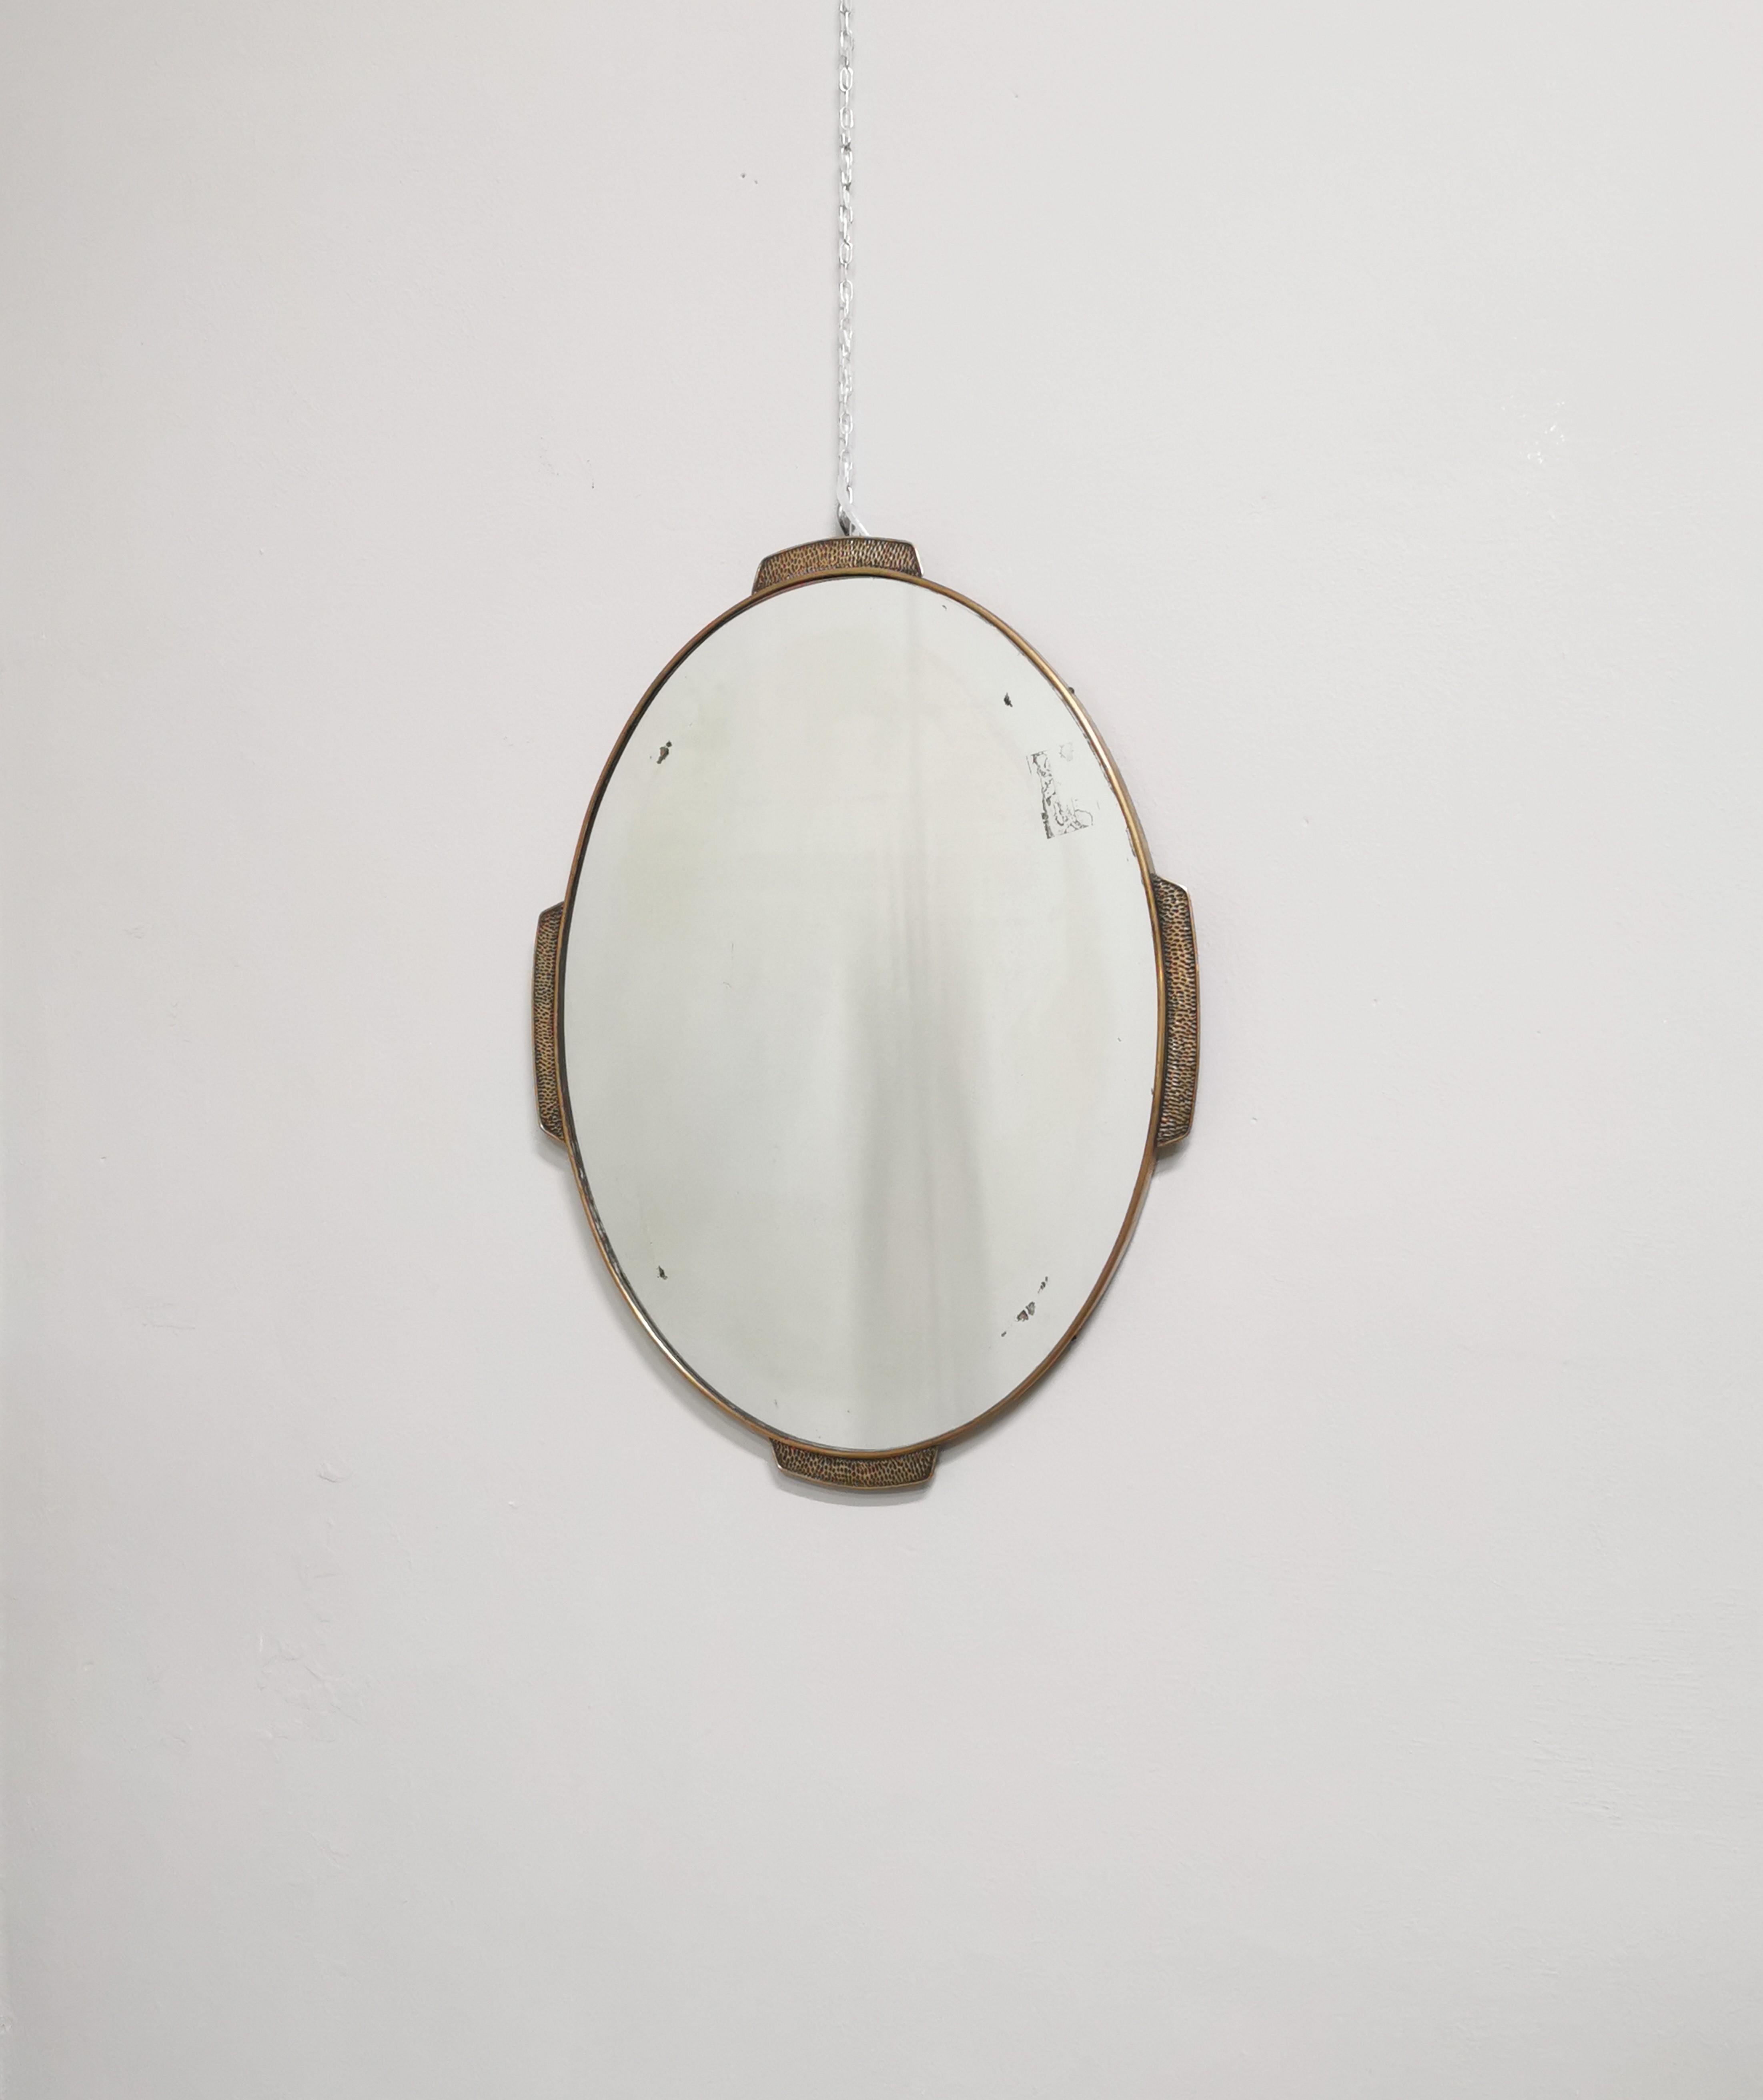 Rare and particular wall mirror by an unknown designer, oval-shaped with brass border and 4 hammered brass decorations. The mirror has a wooden frame. Italian production of the 1950s.